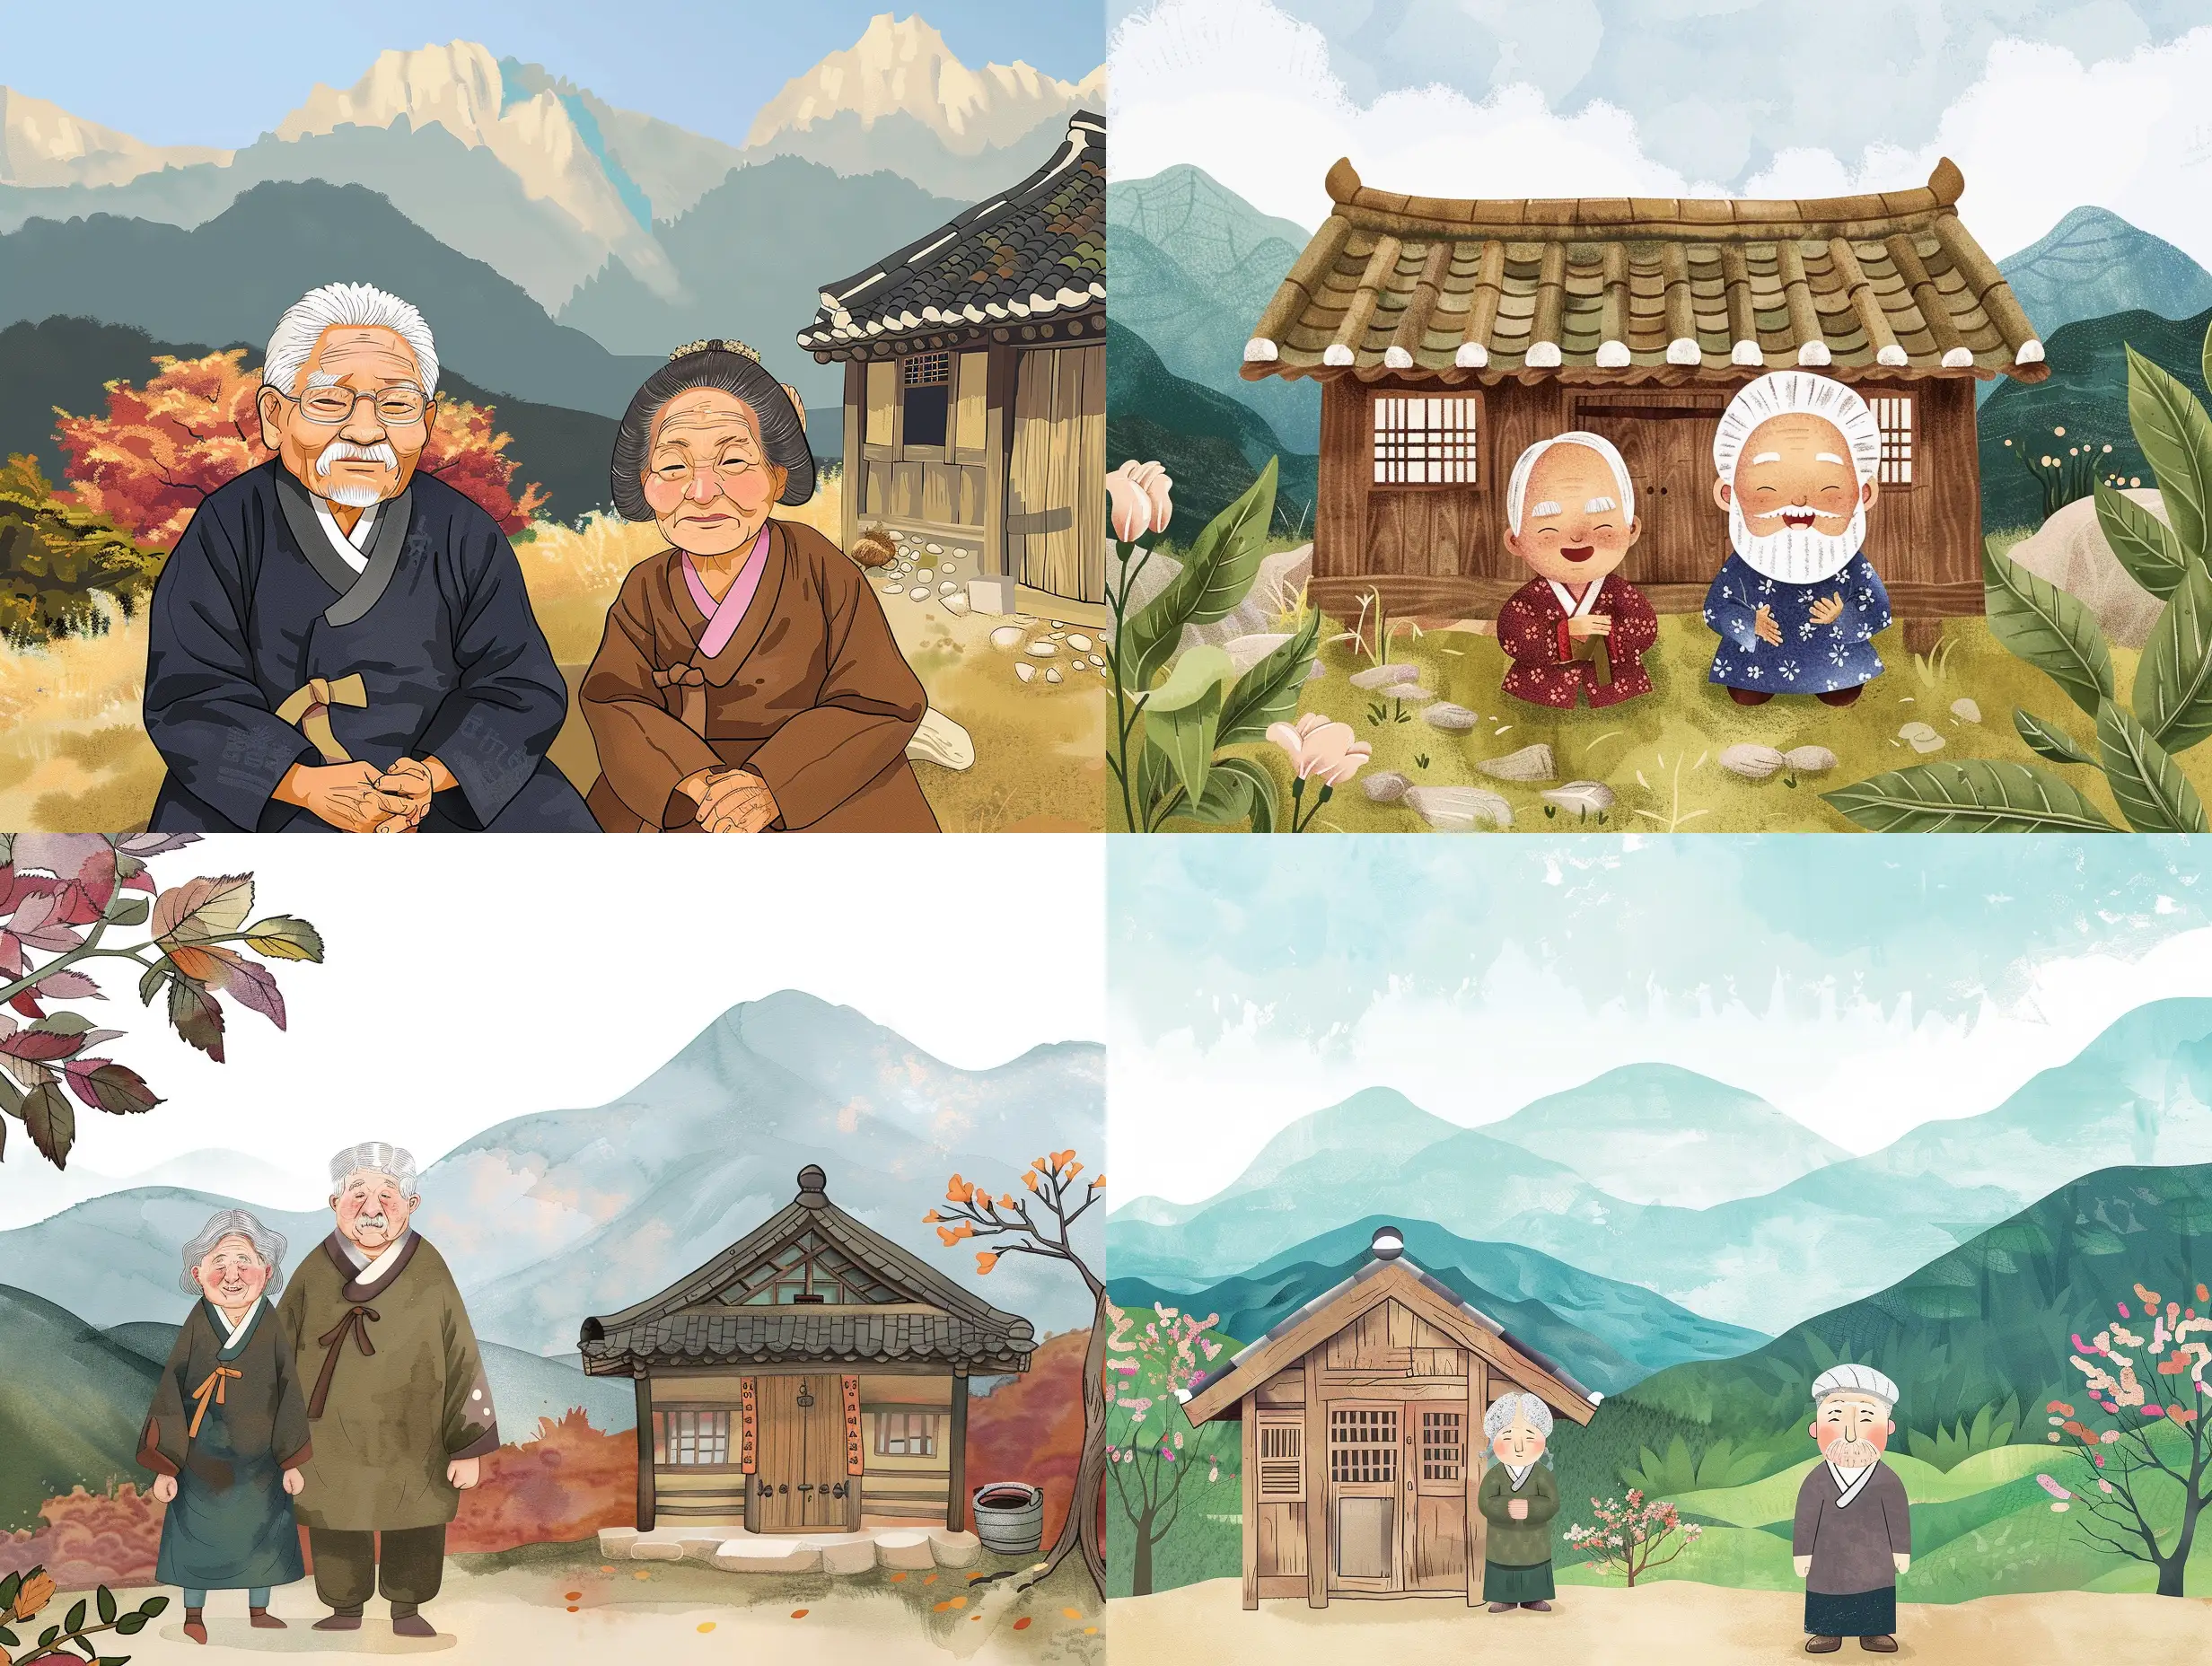 Illustration like fairytale about old Korean man and old Korean woman, they live in the small wood house near the mountains. They have no children